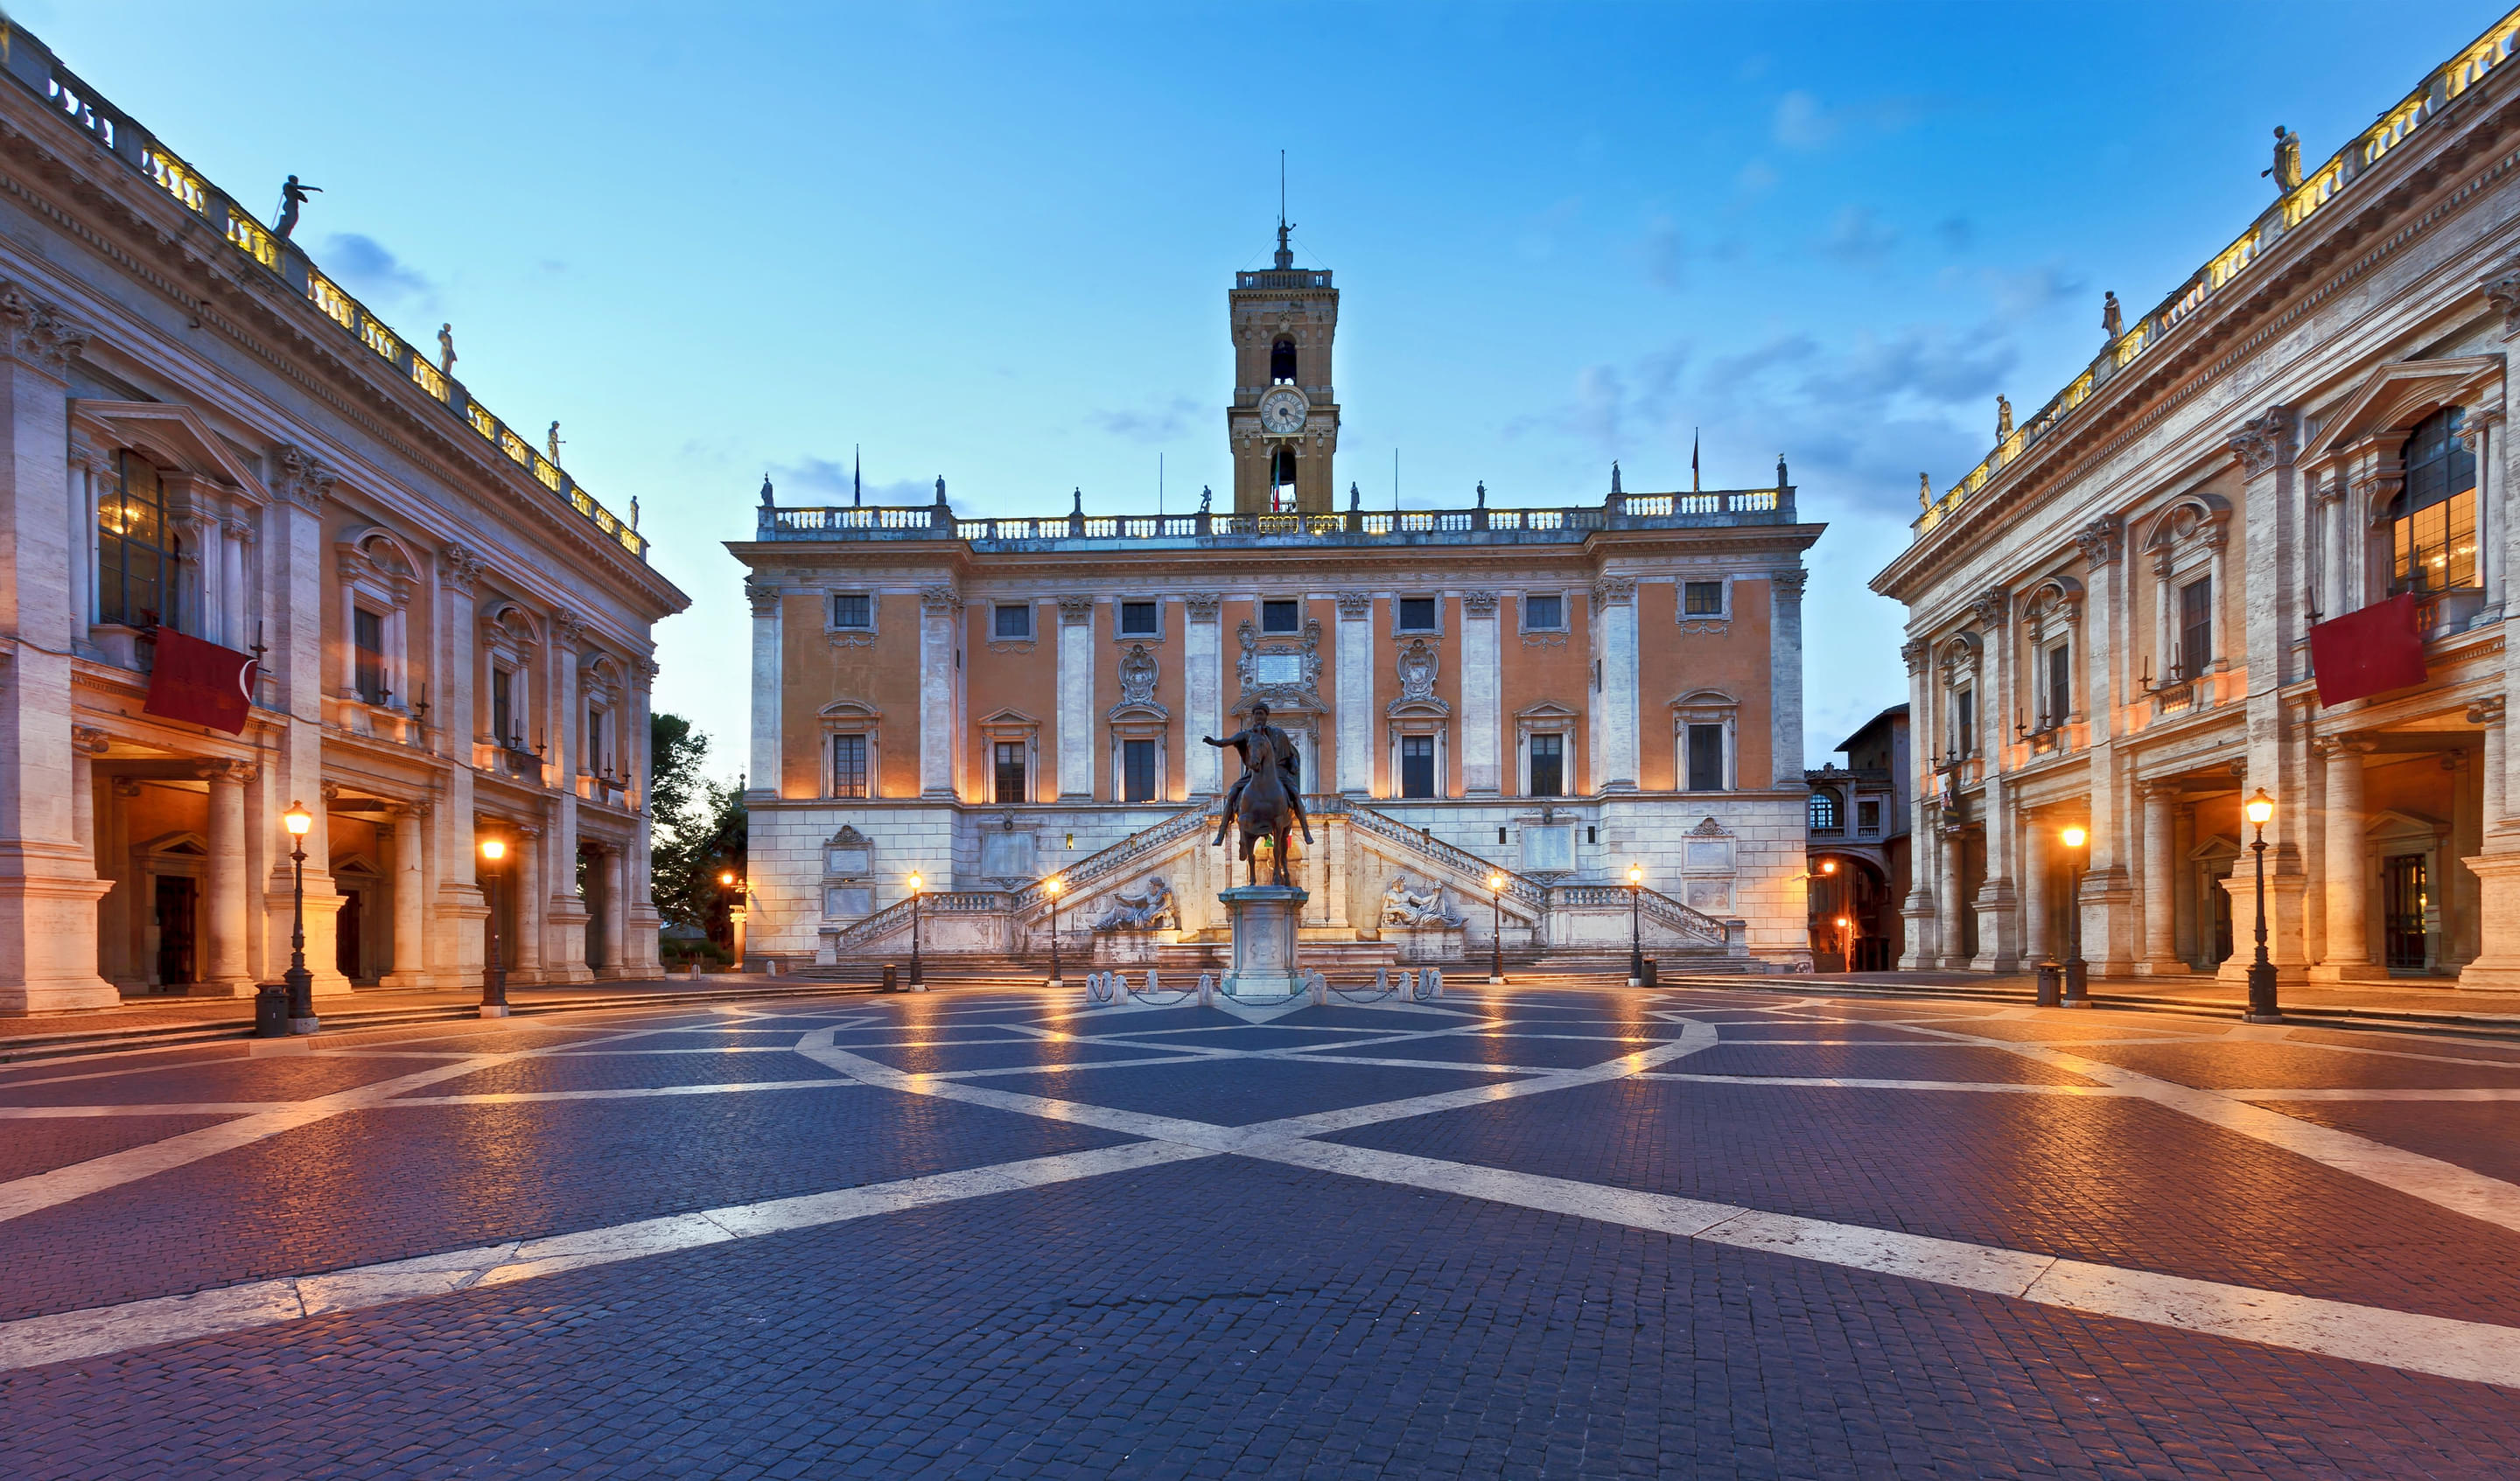 Capitoline Museums Overview